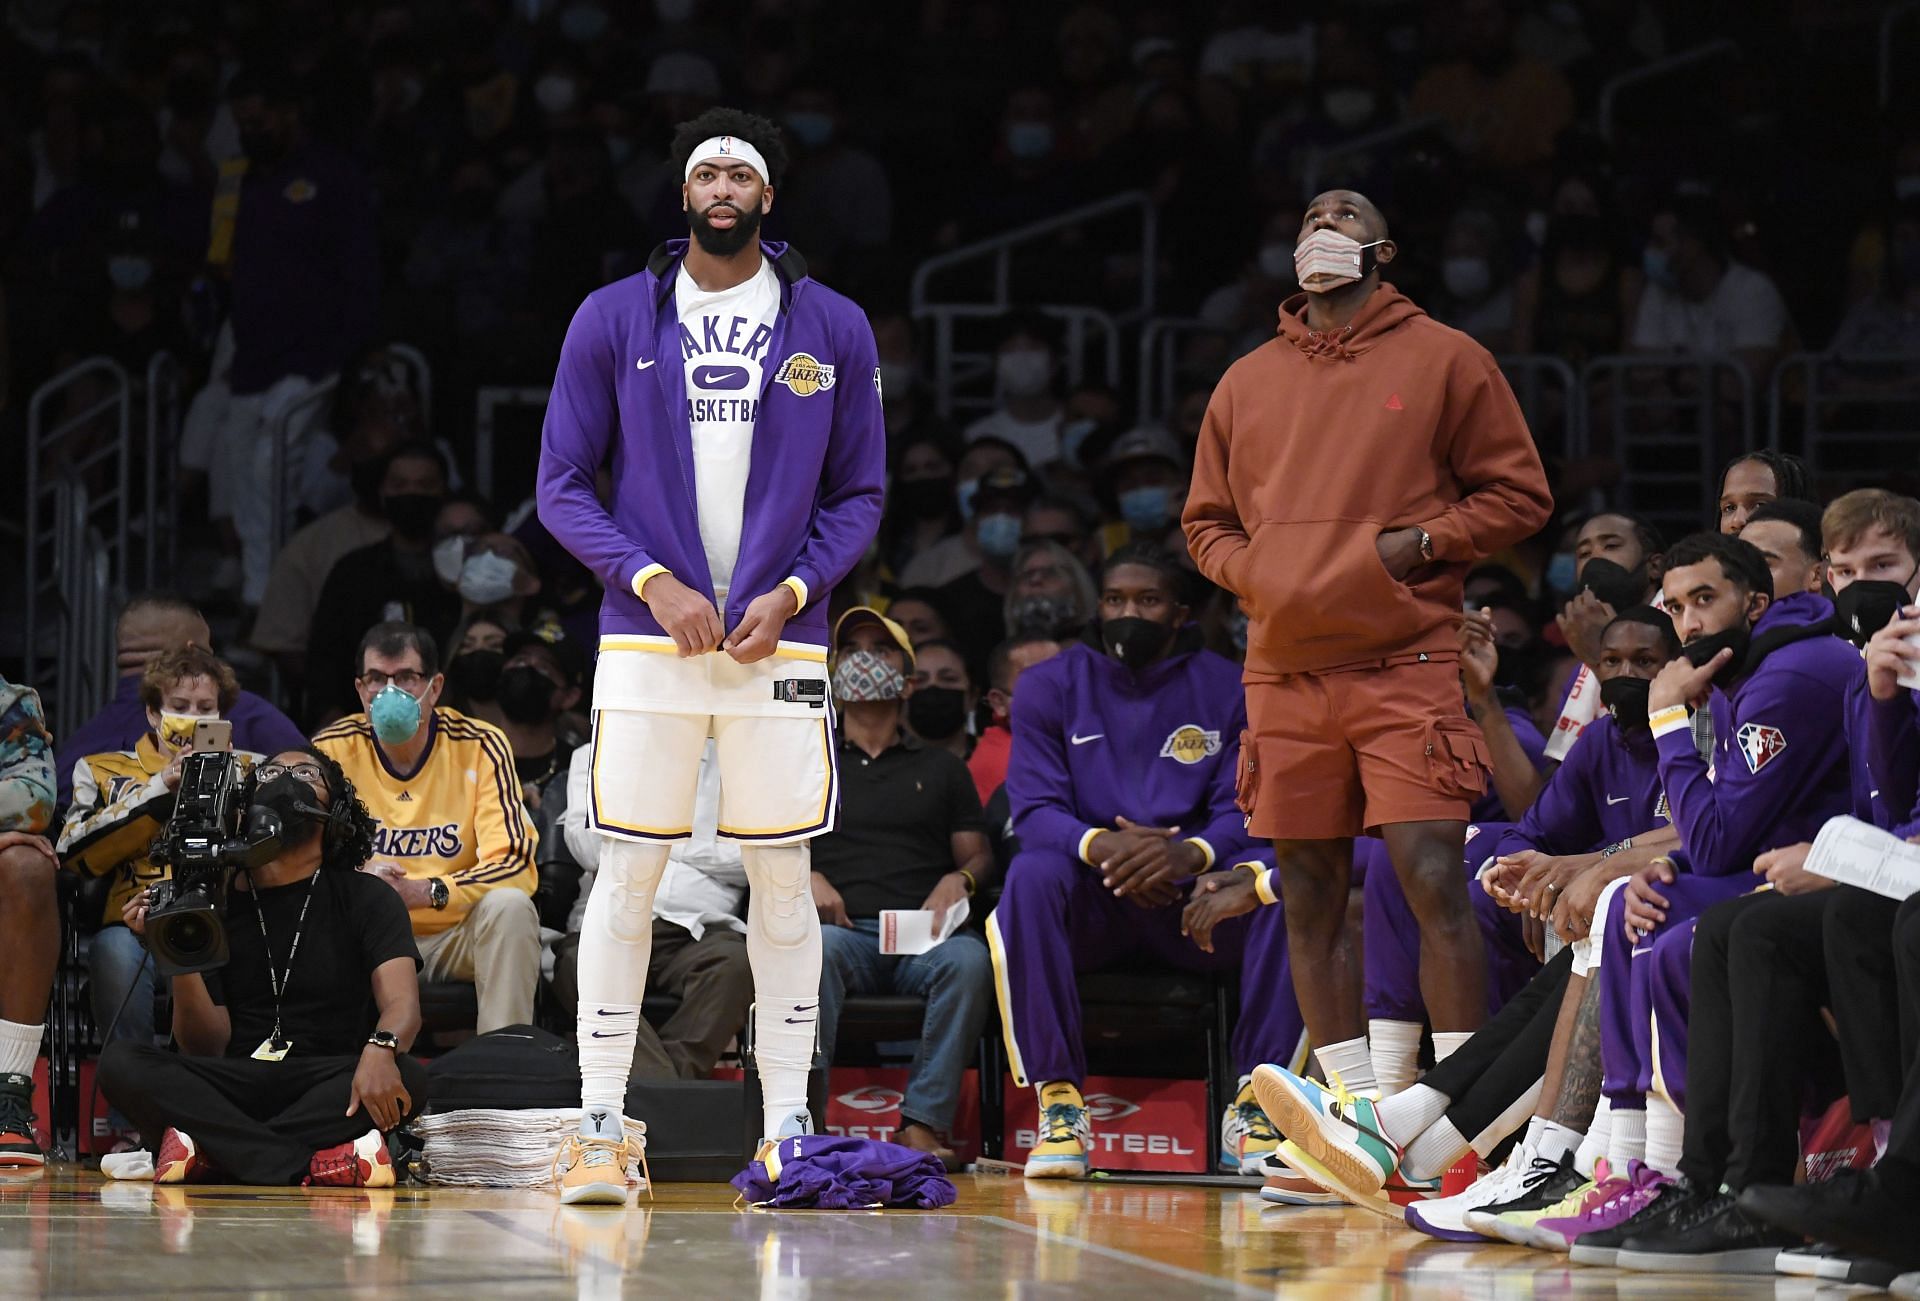 Los Angeles Lakers superstars LeBron James and Anthony Davis